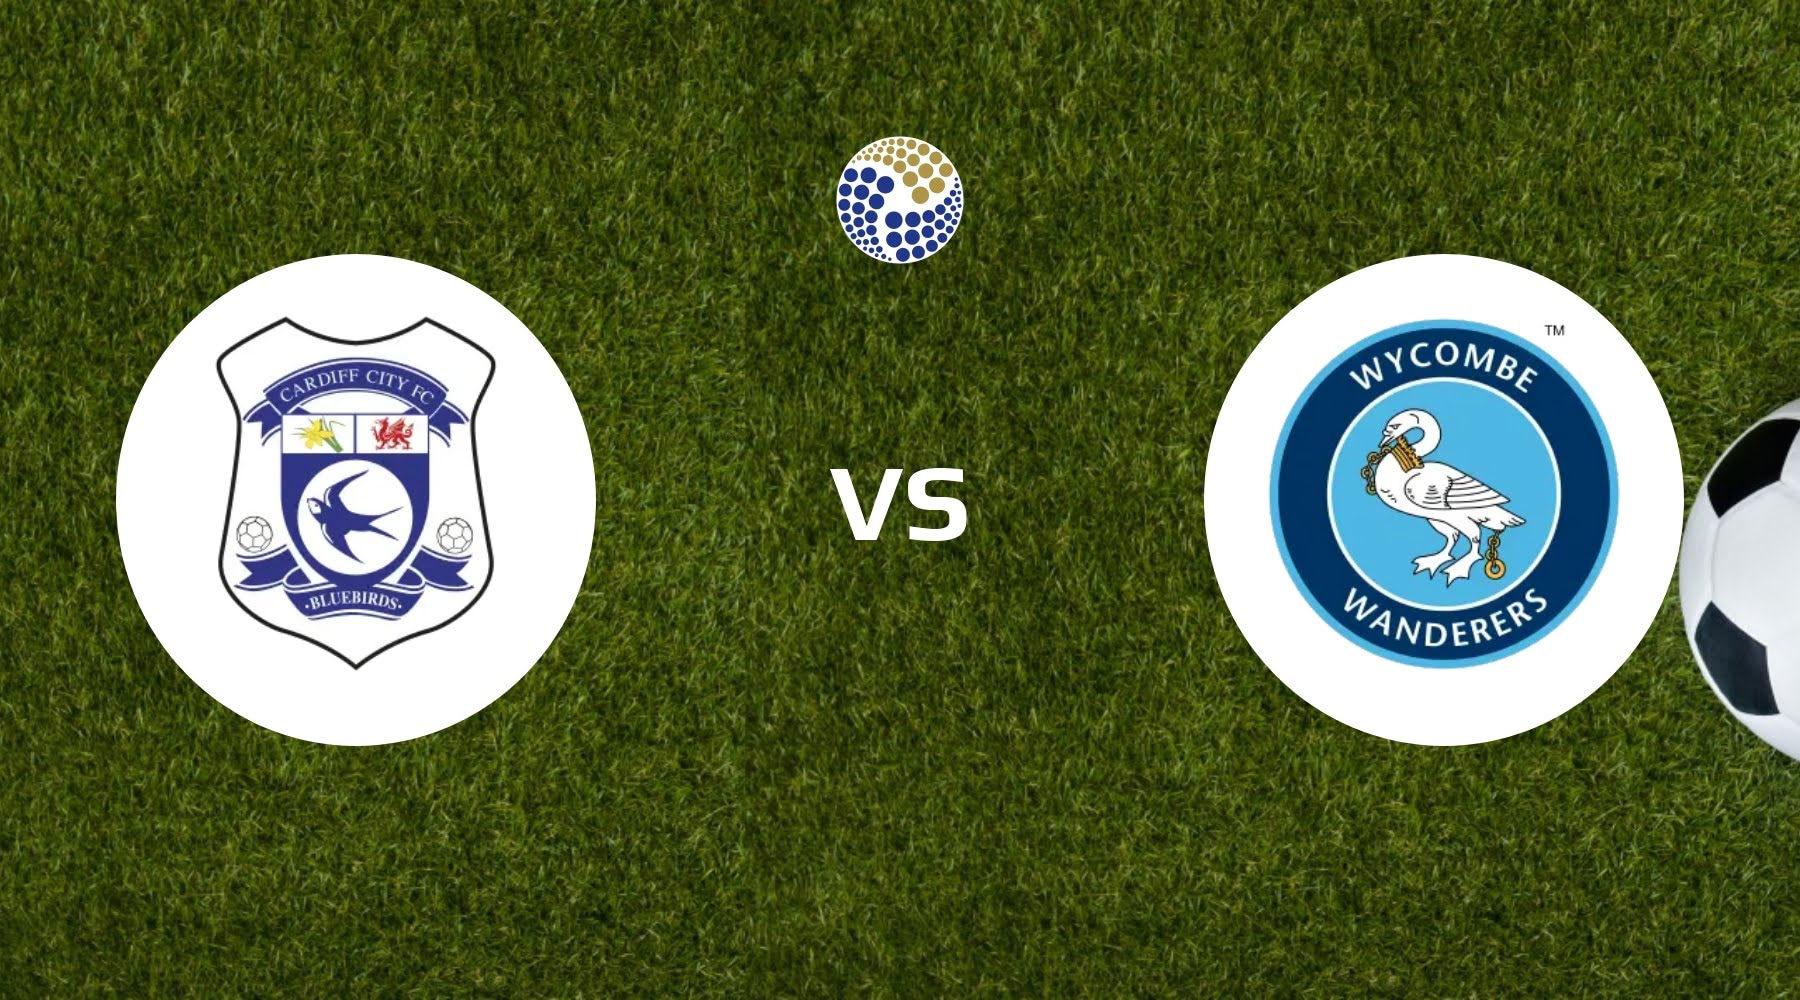 Cardiff City vs Wycombe Wanderers Prediction & Betting Tips